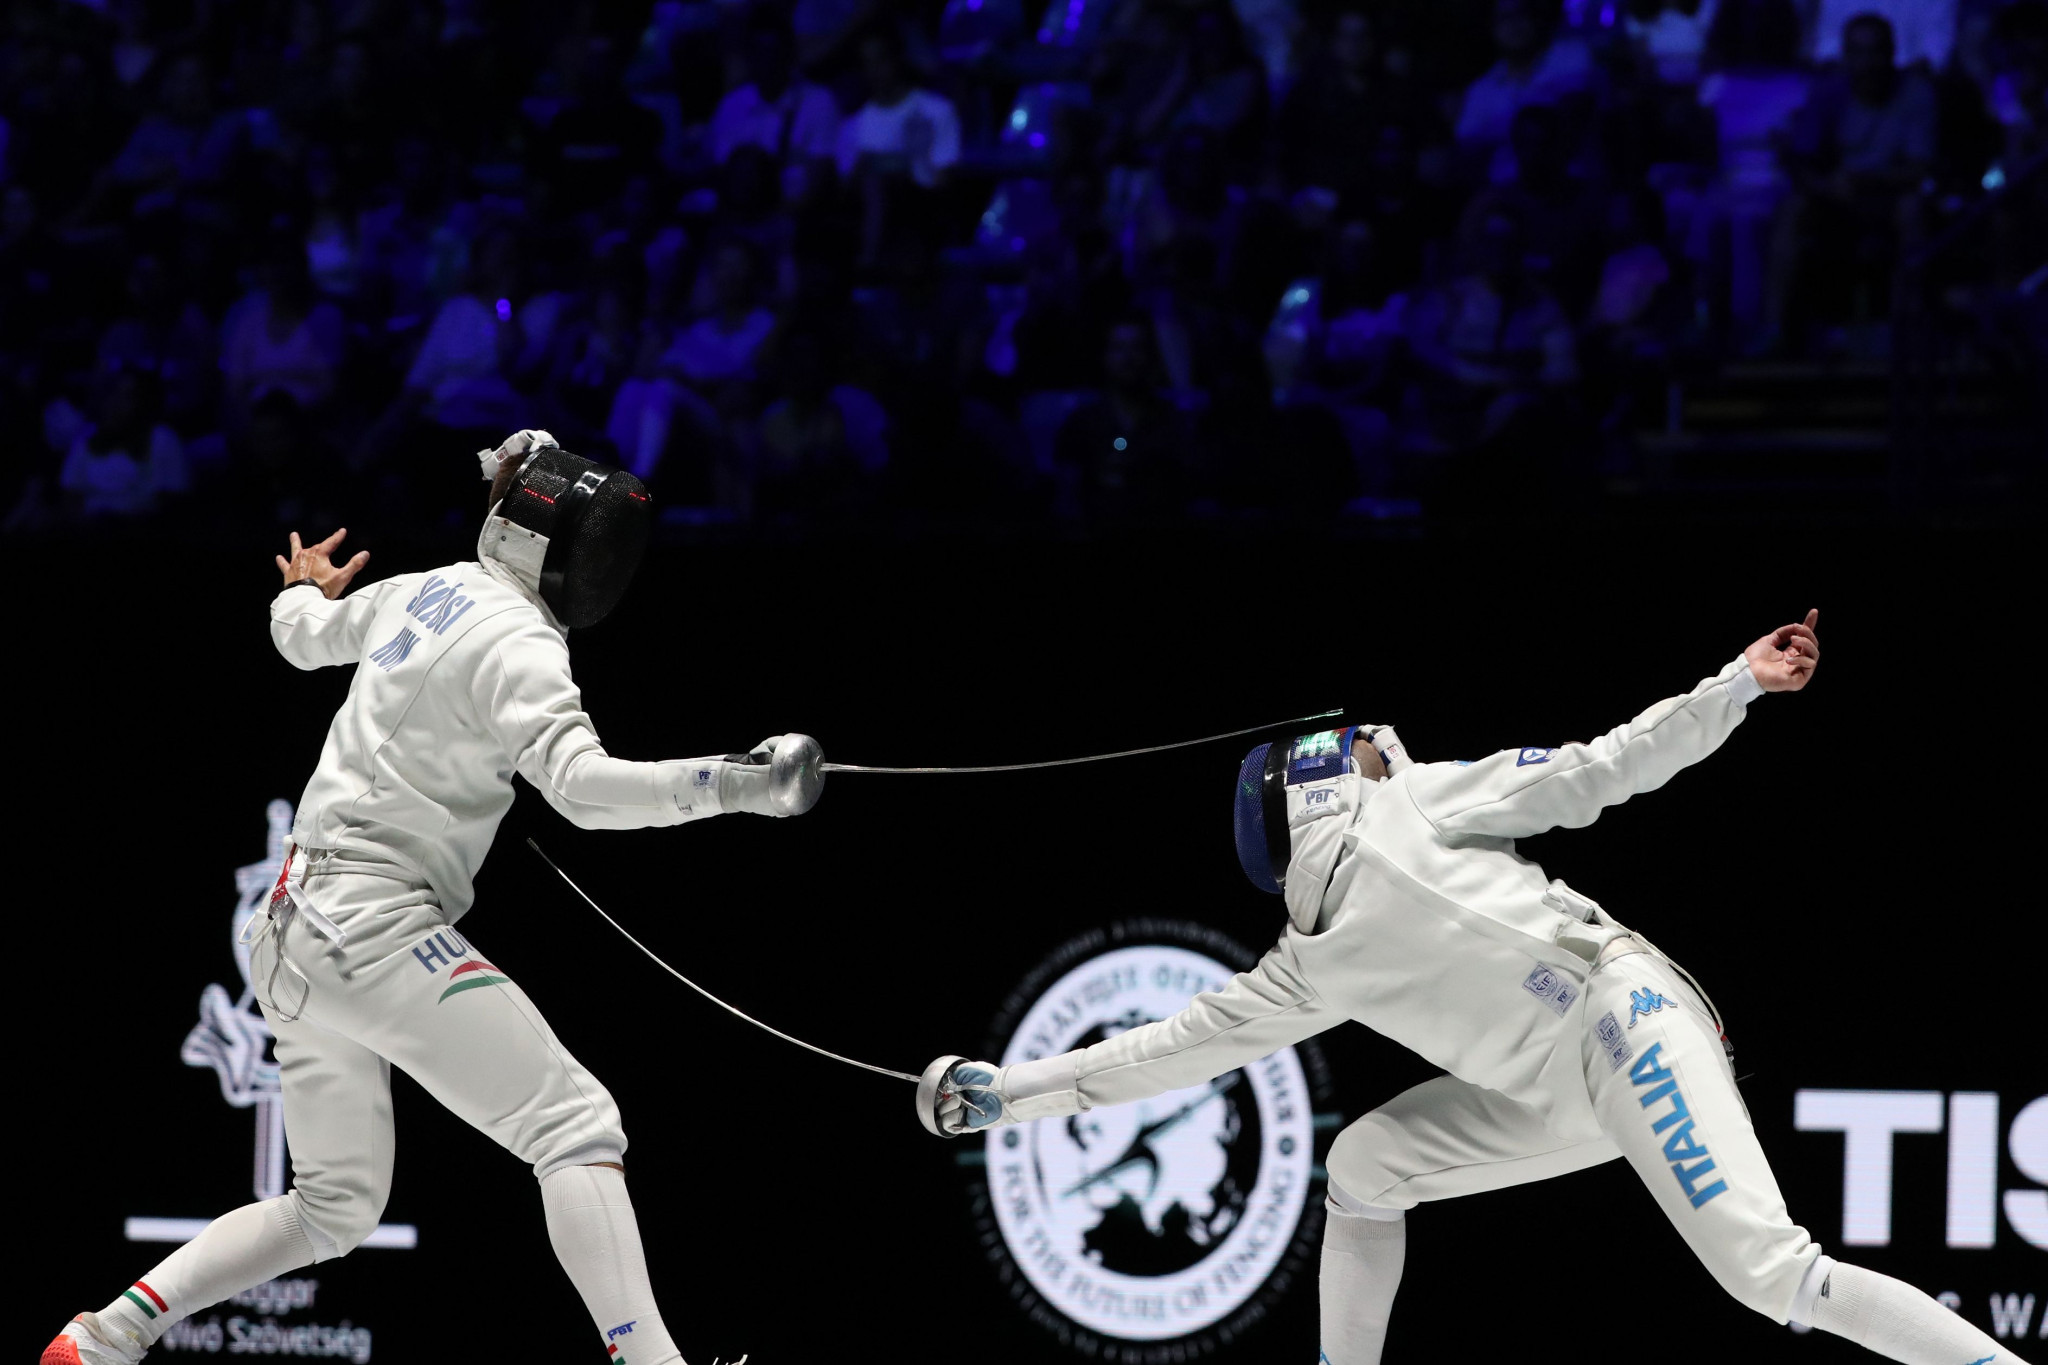 Italy's Andrea Santarelli, right, is the top seed at the FIE Men's Épée World Cup in Heidenheim ©Getty Images